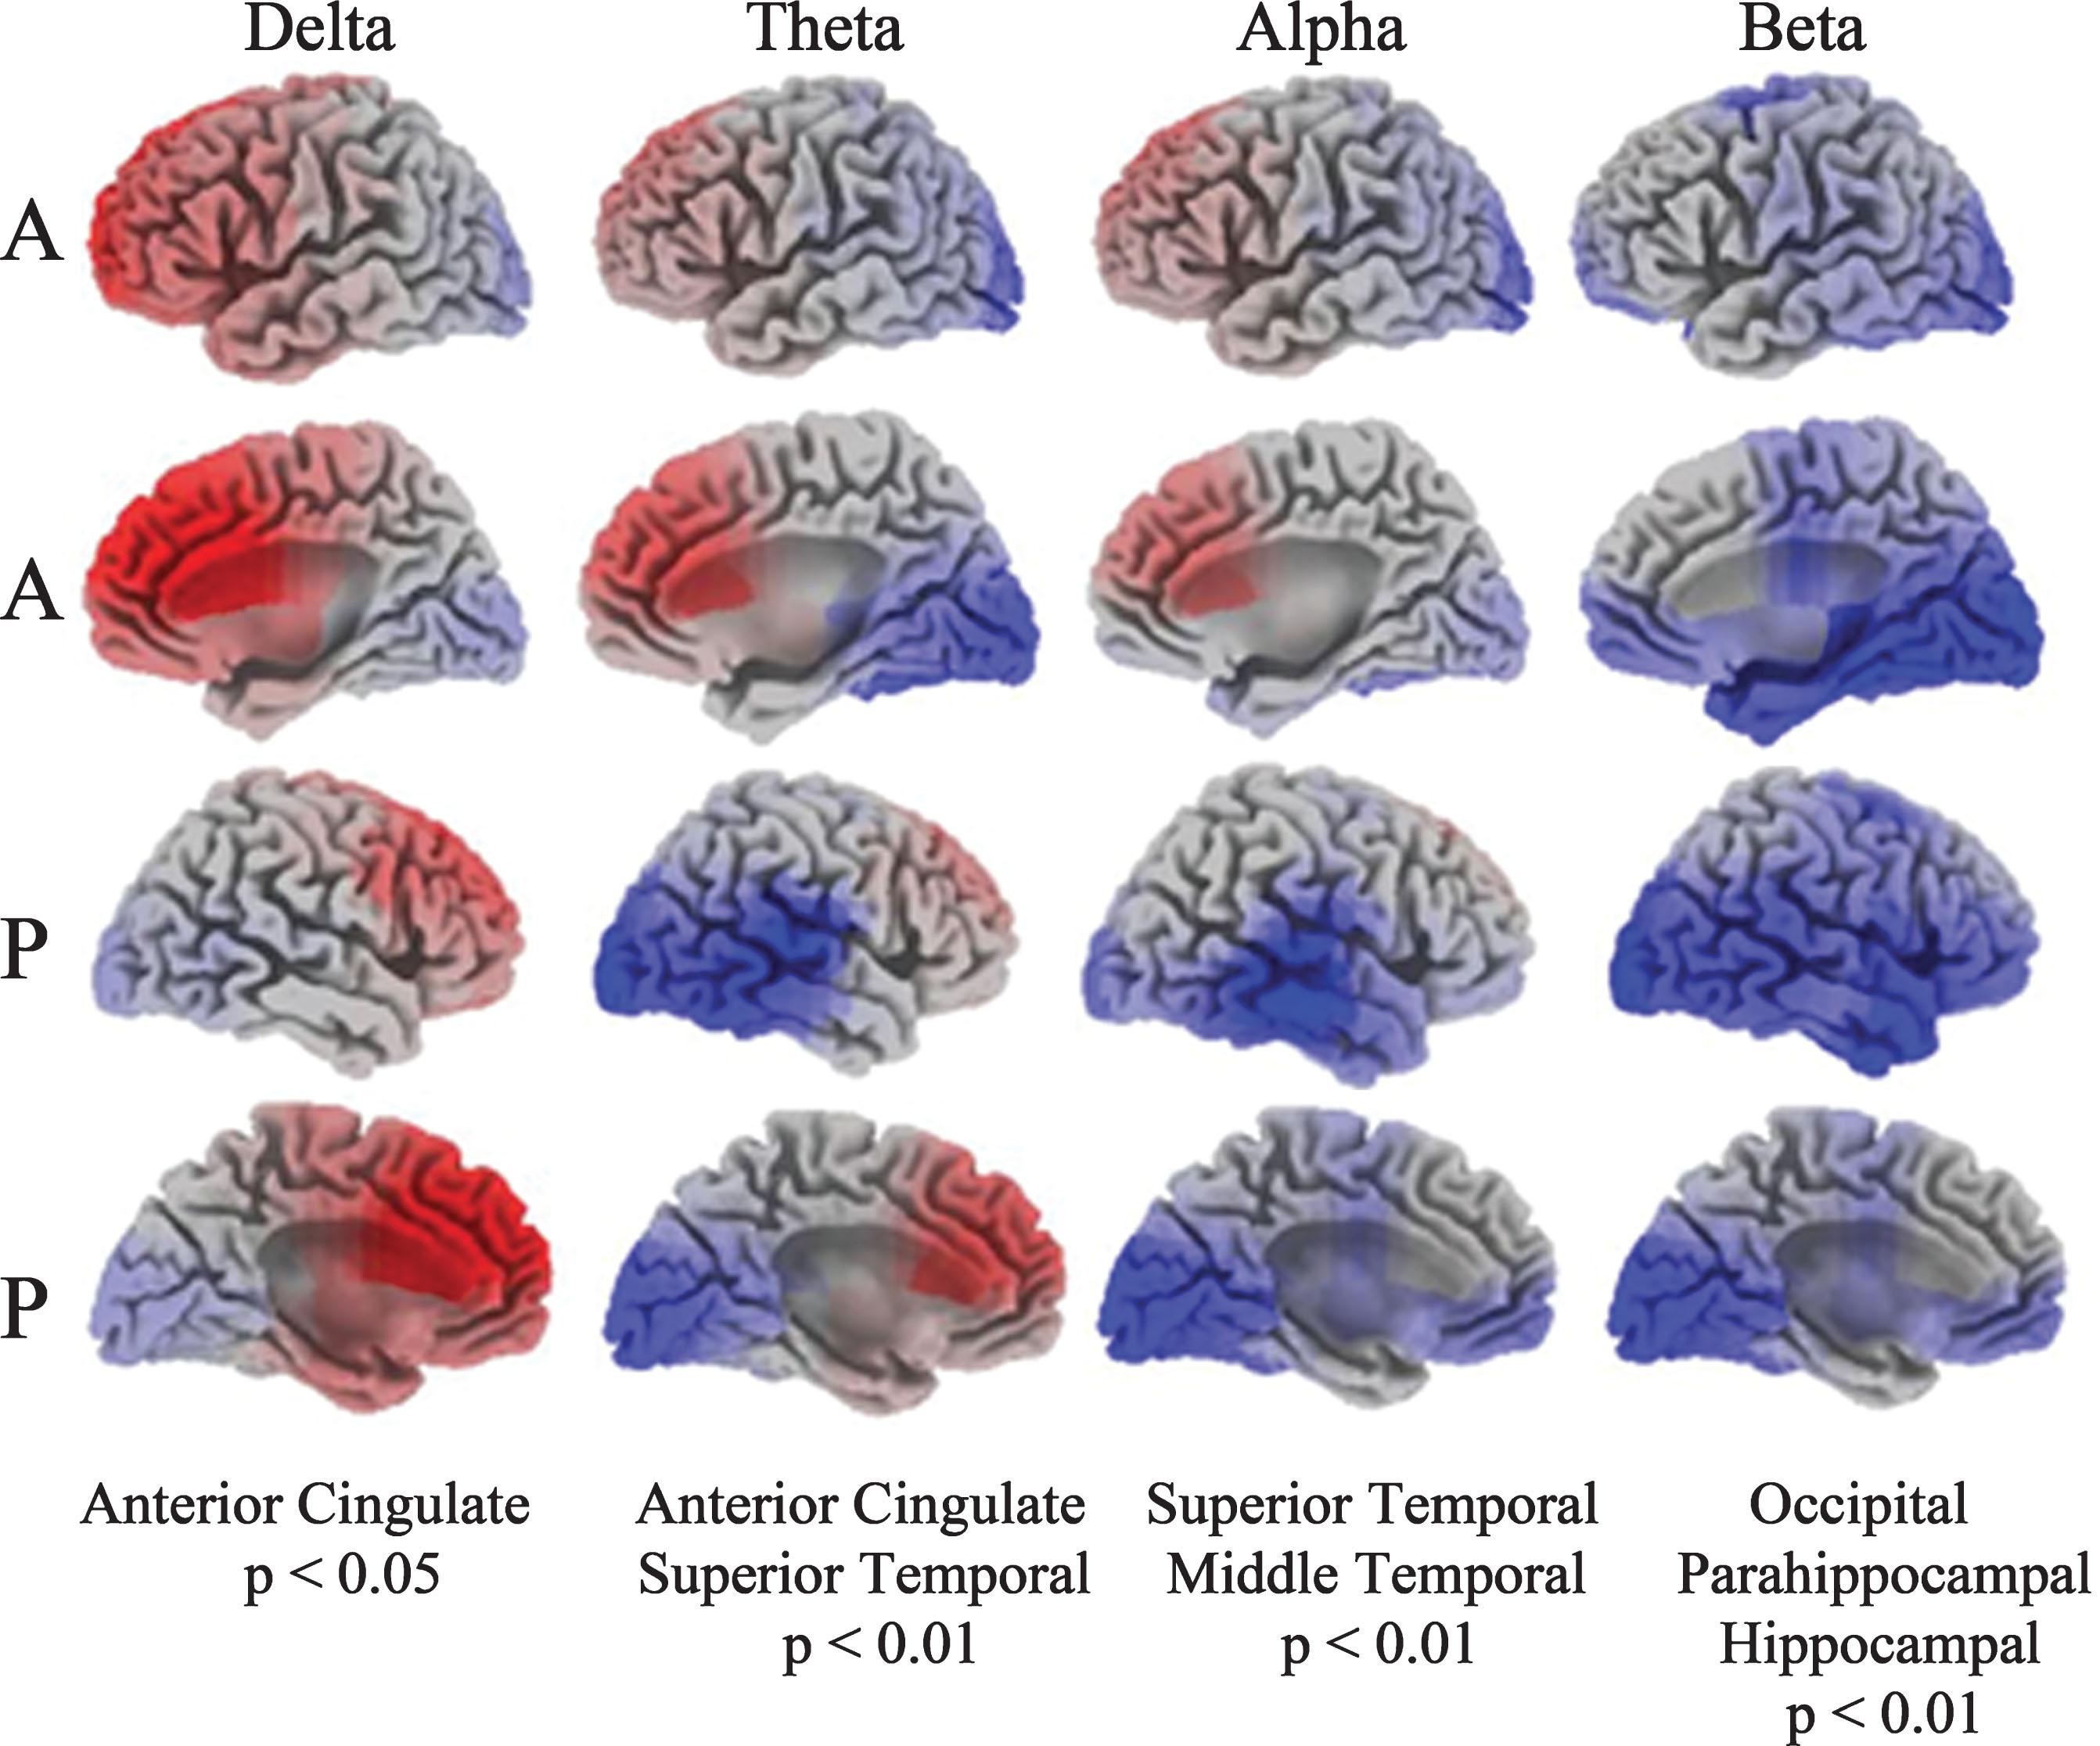 Current density images in Talairach space obtained by sLORETA in PD versus HC cohorts (A: anterior, P: posterior). EEG activity differences are denoted by red (increased activity) or blue (decreased activity).